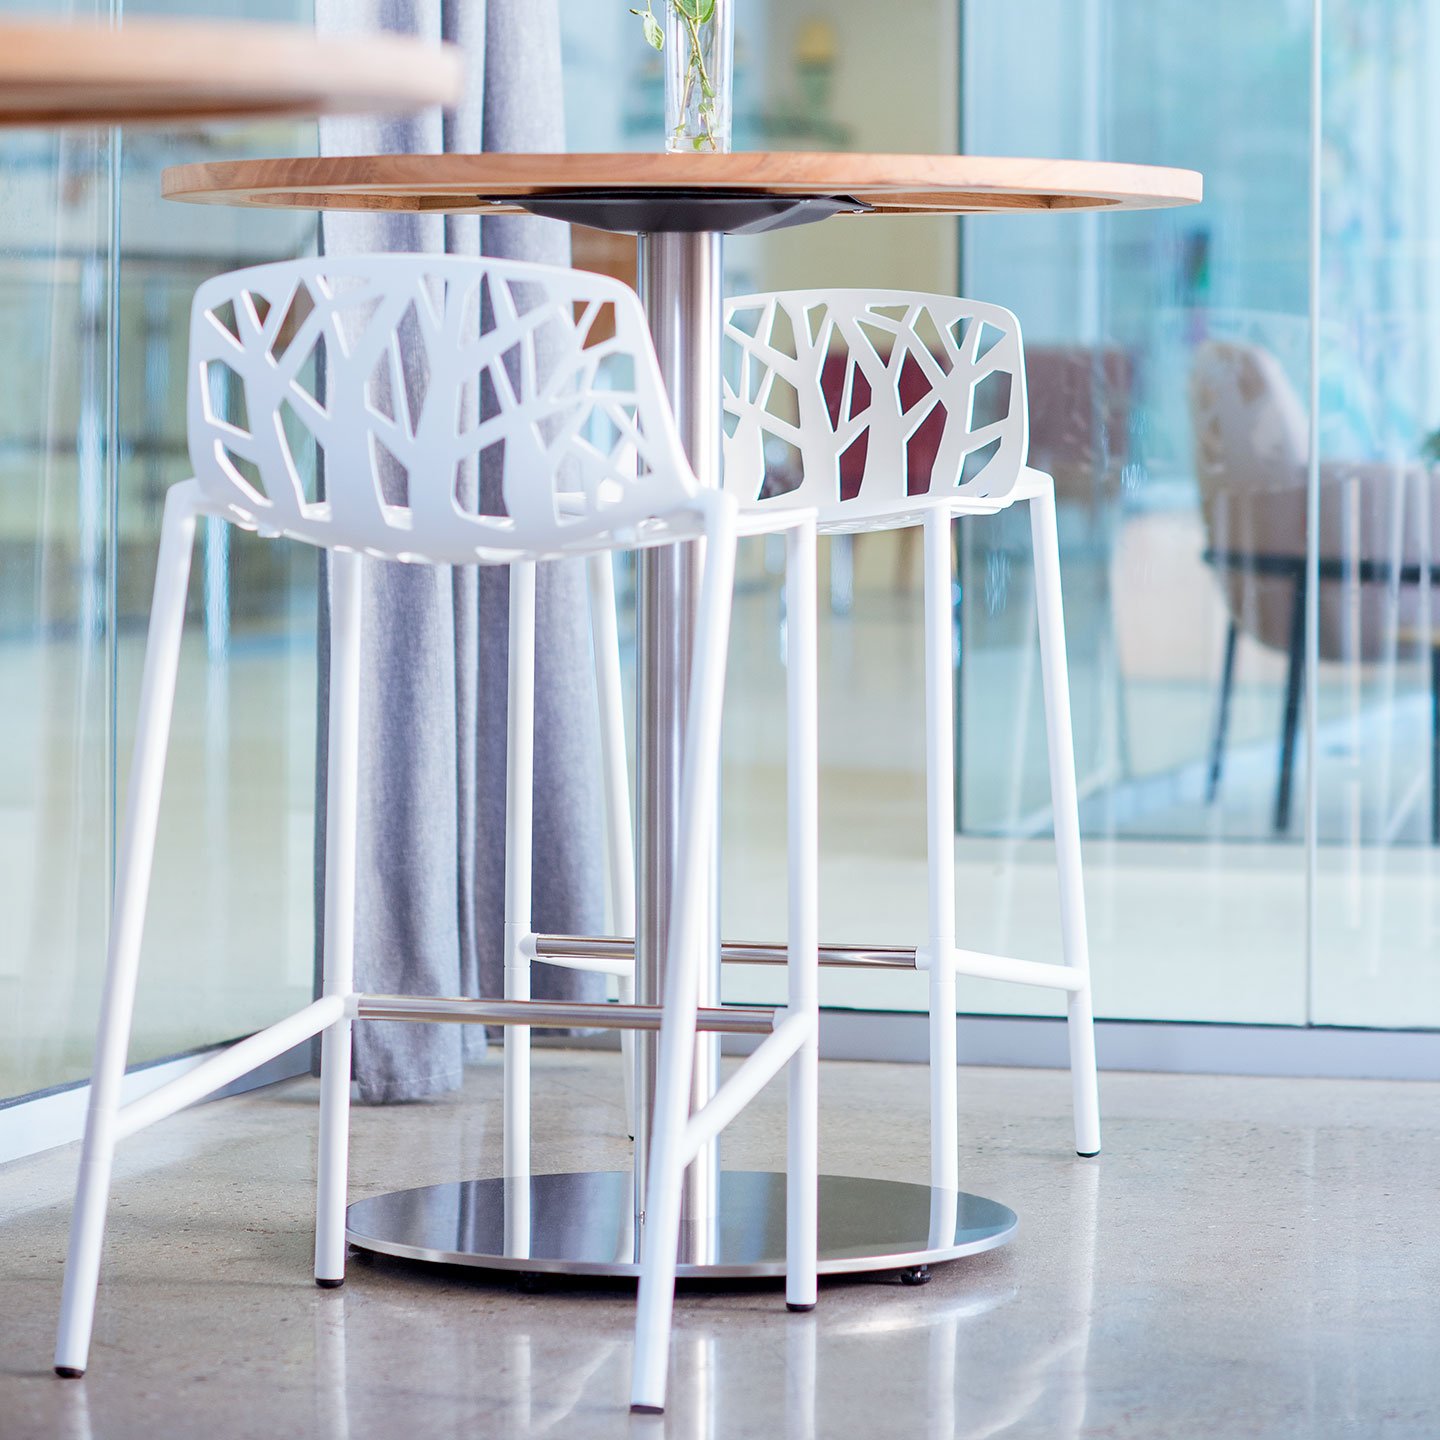 Haworth Forest stools in white in an outdoor space at a circular table